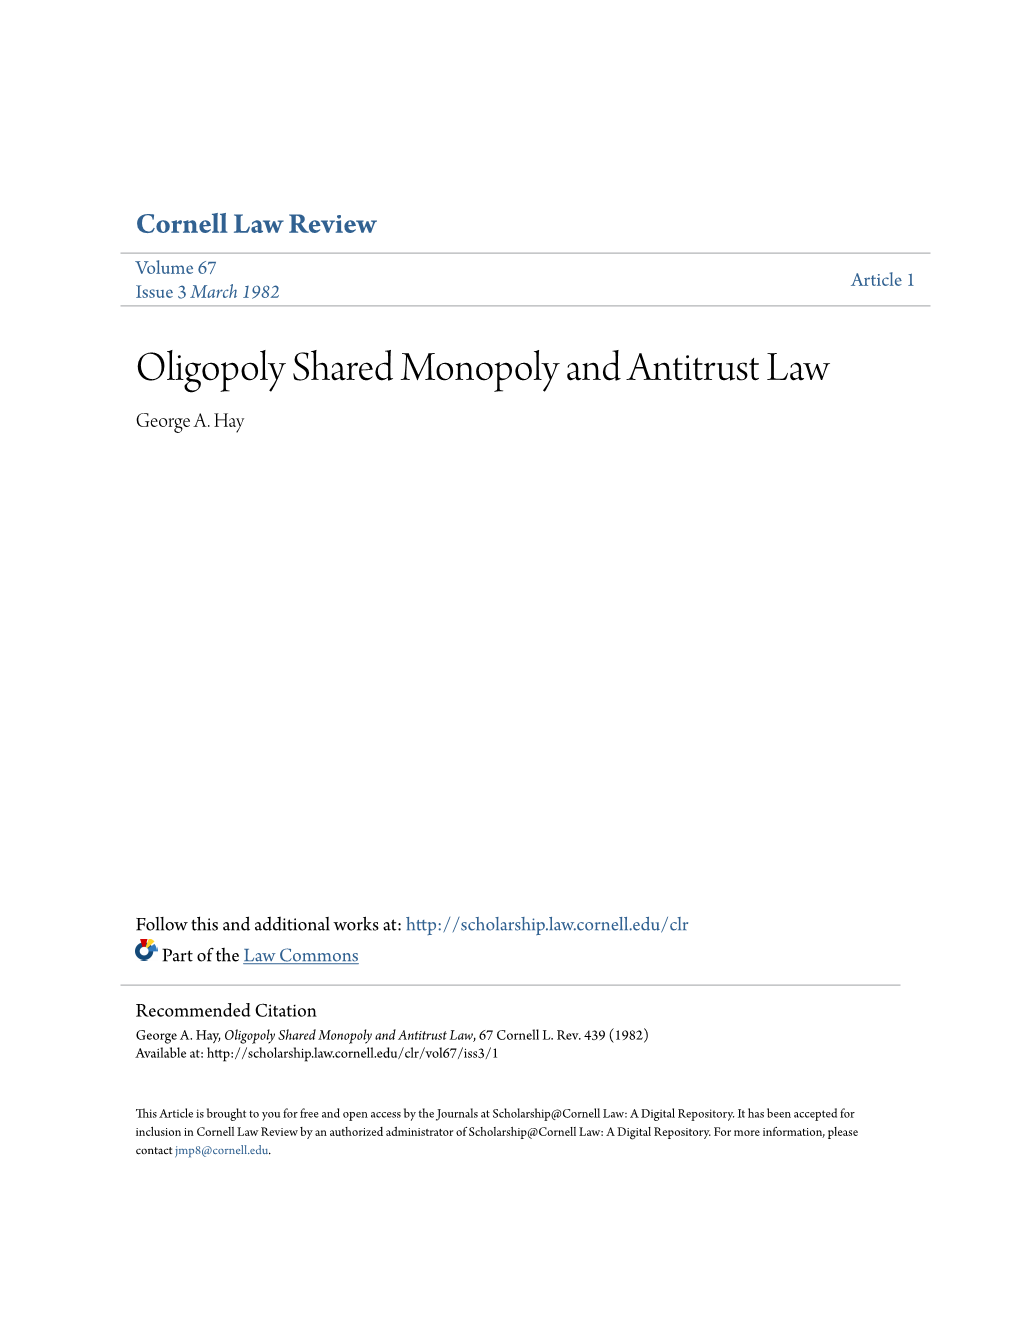 Oligopoly Shared Monopoly and Antitrust Law George A